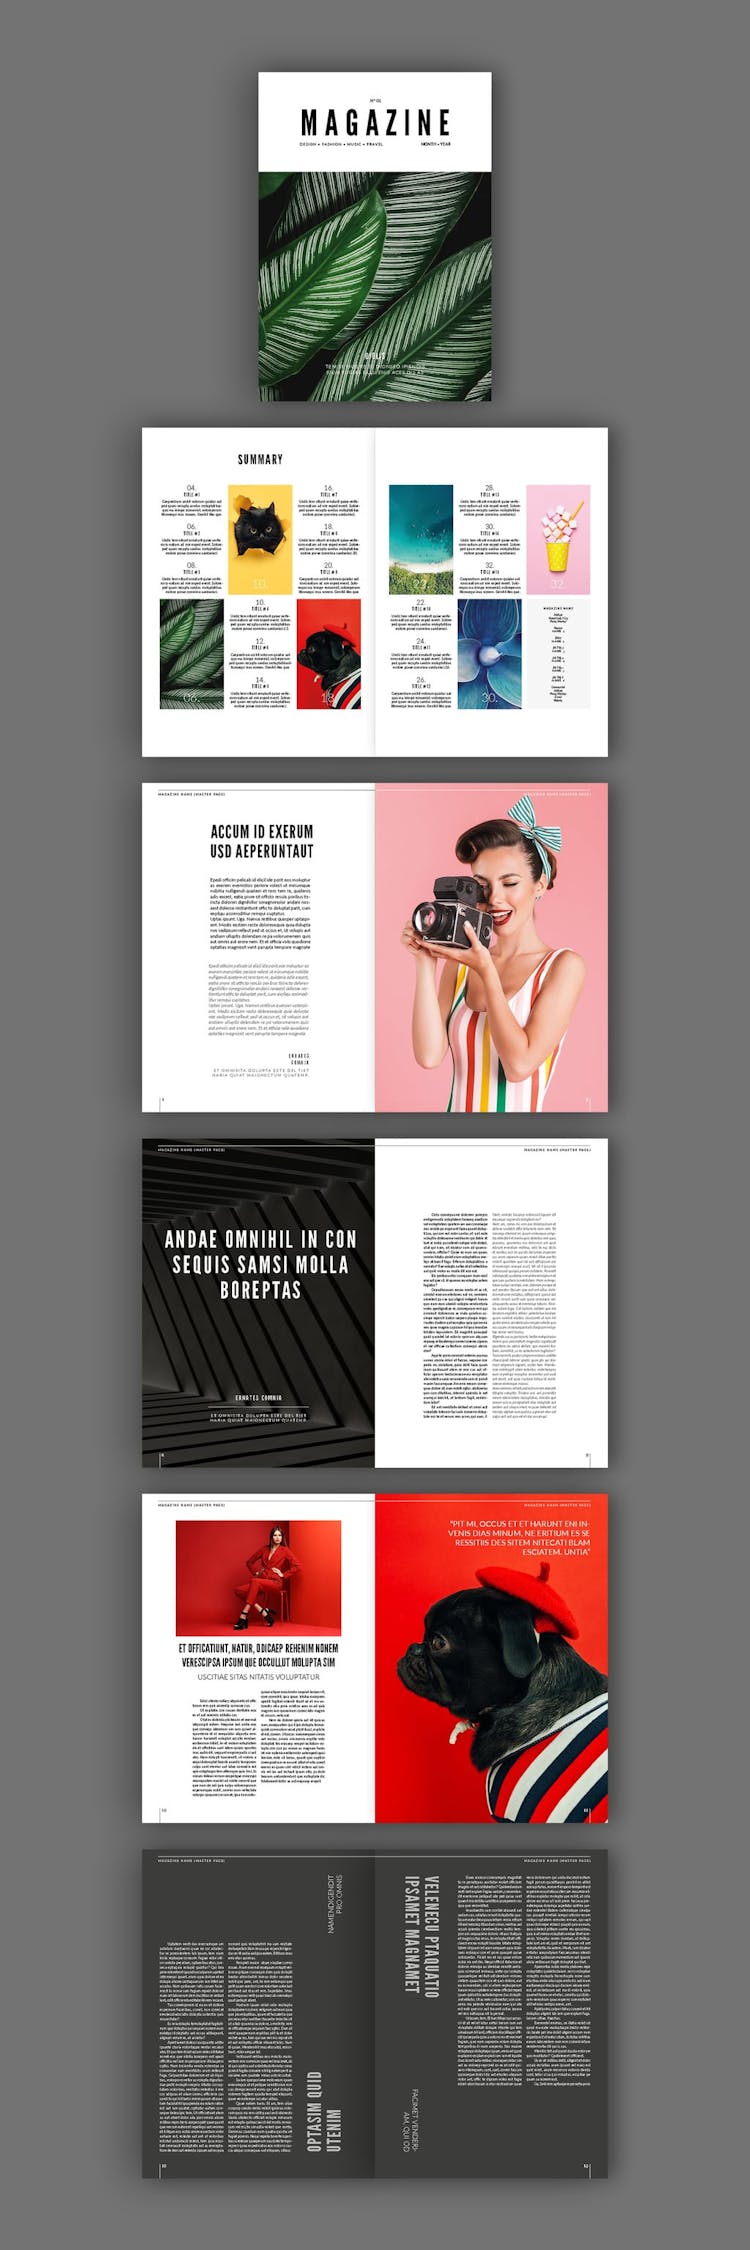 75 Fresh Indesign Templates And Where To Find More Redokun